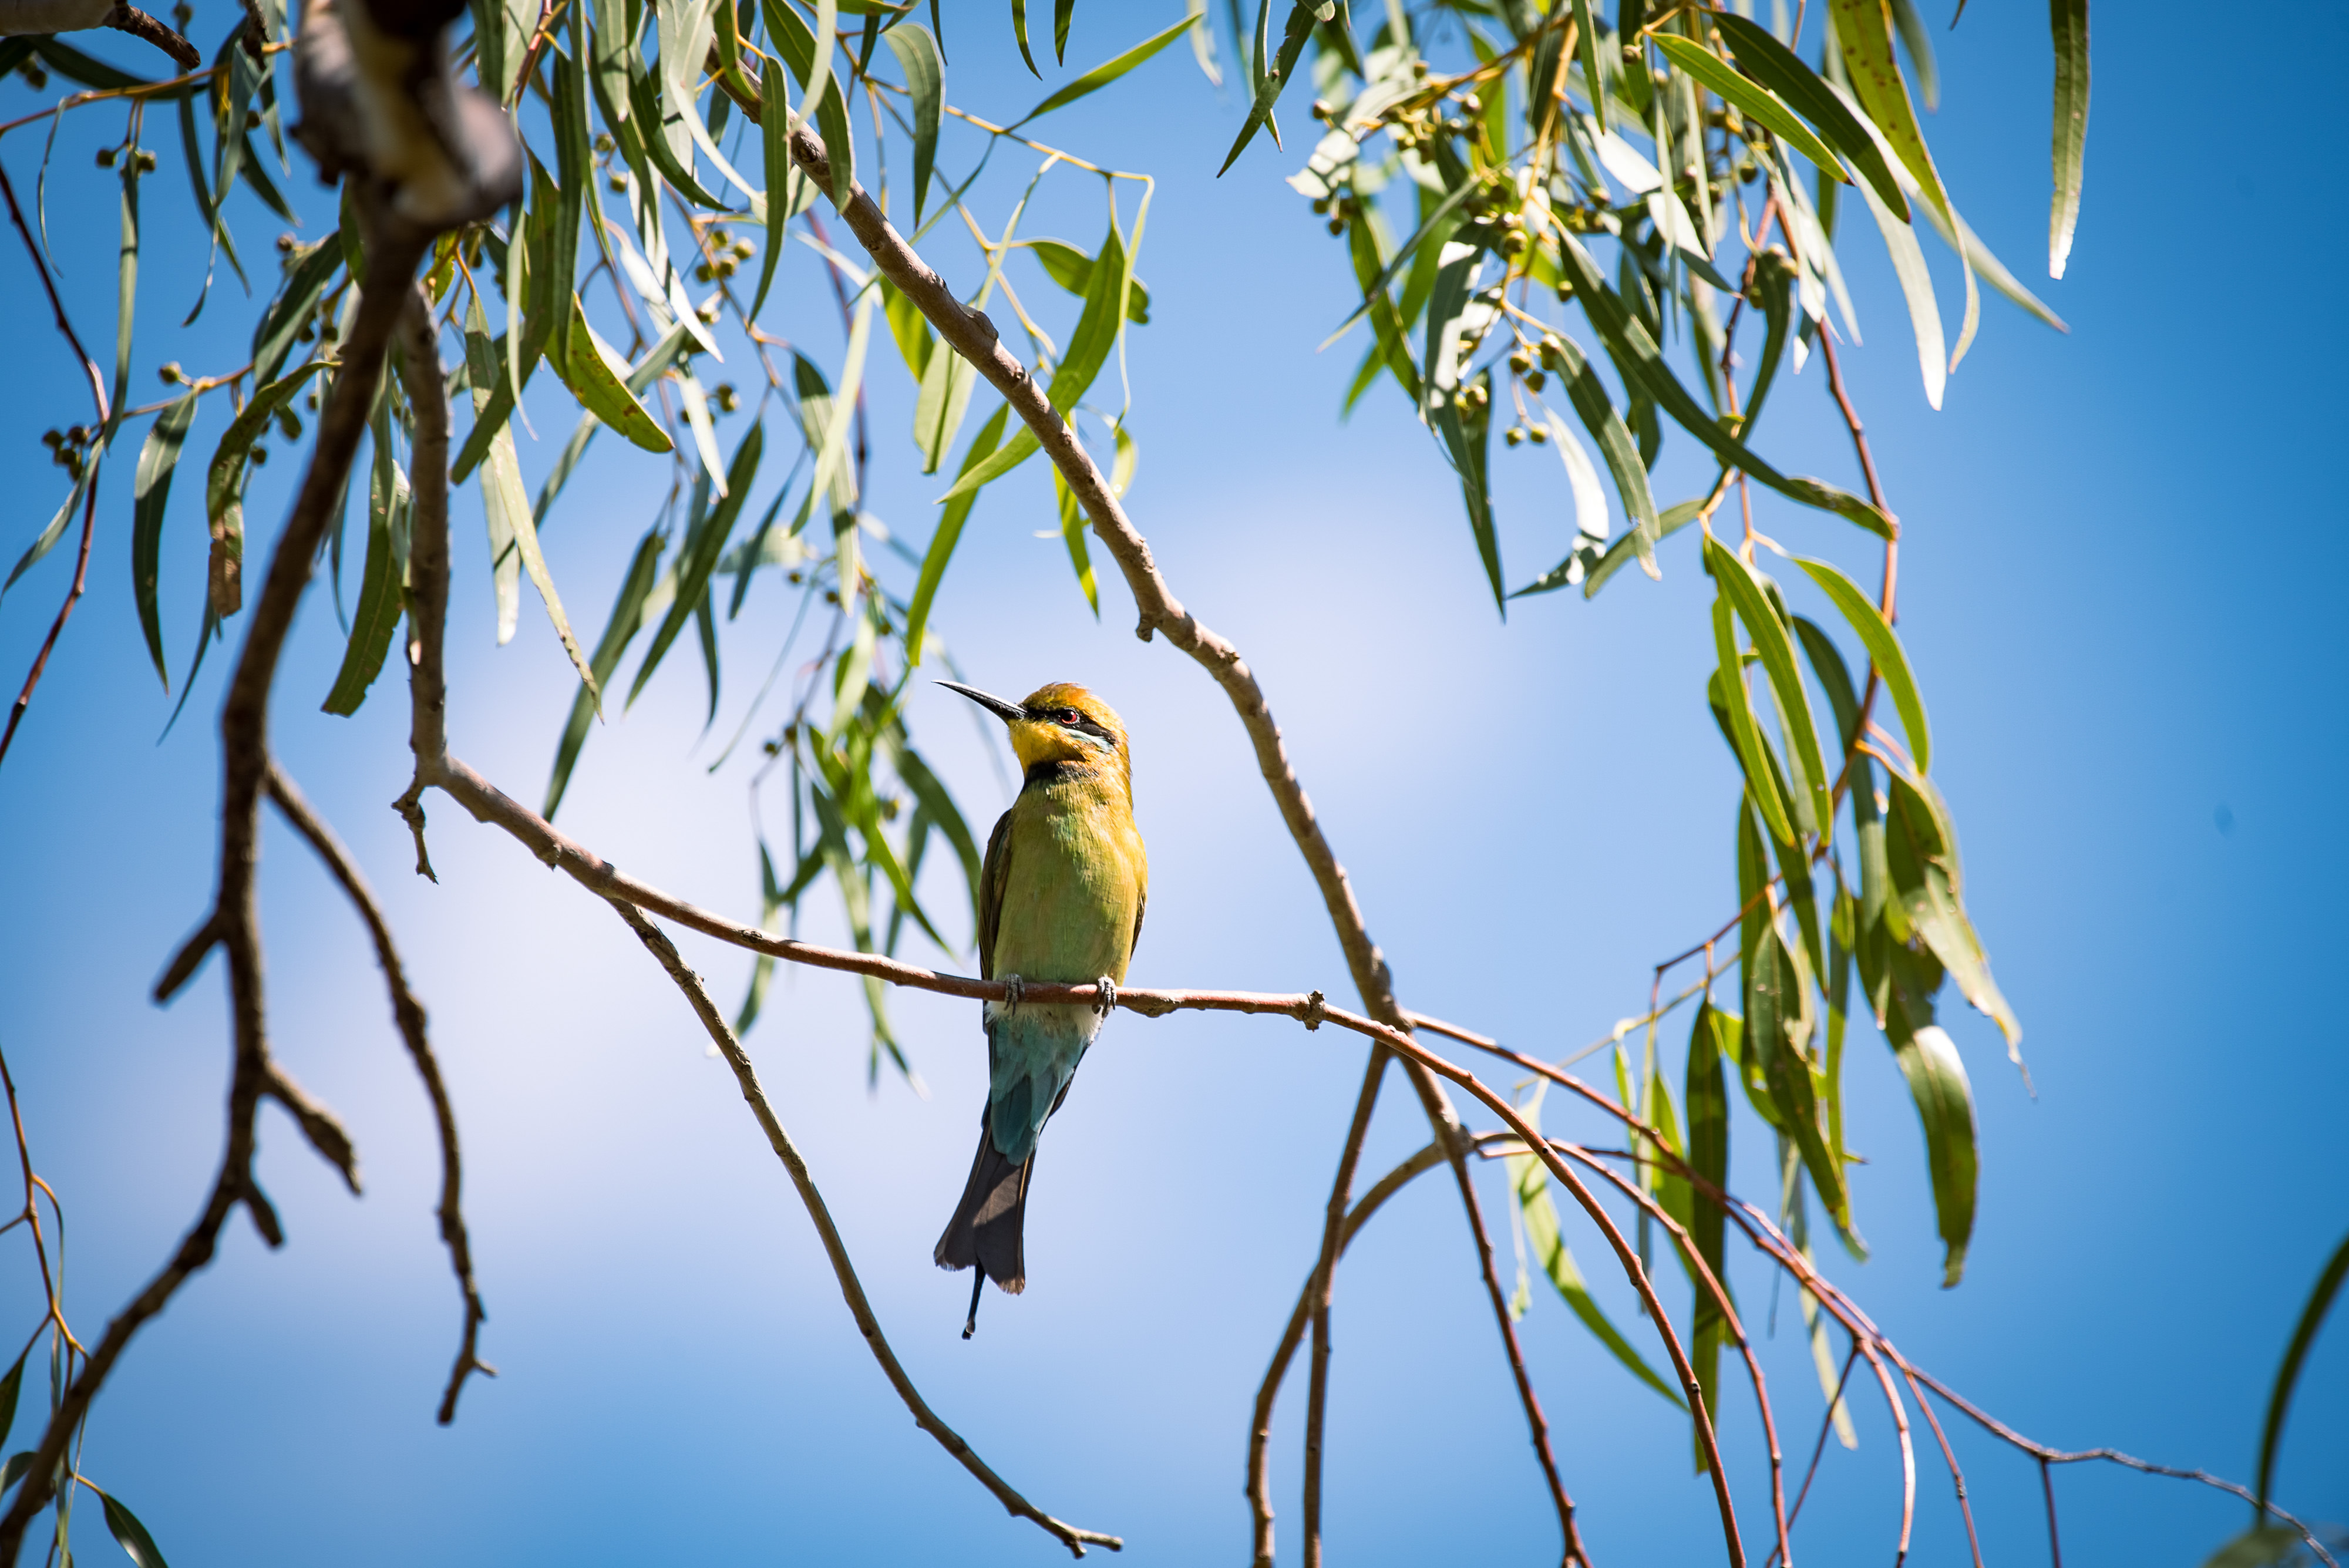 A yellow bird (rainbow bee-eater) sits on a tree branch against a blue sky